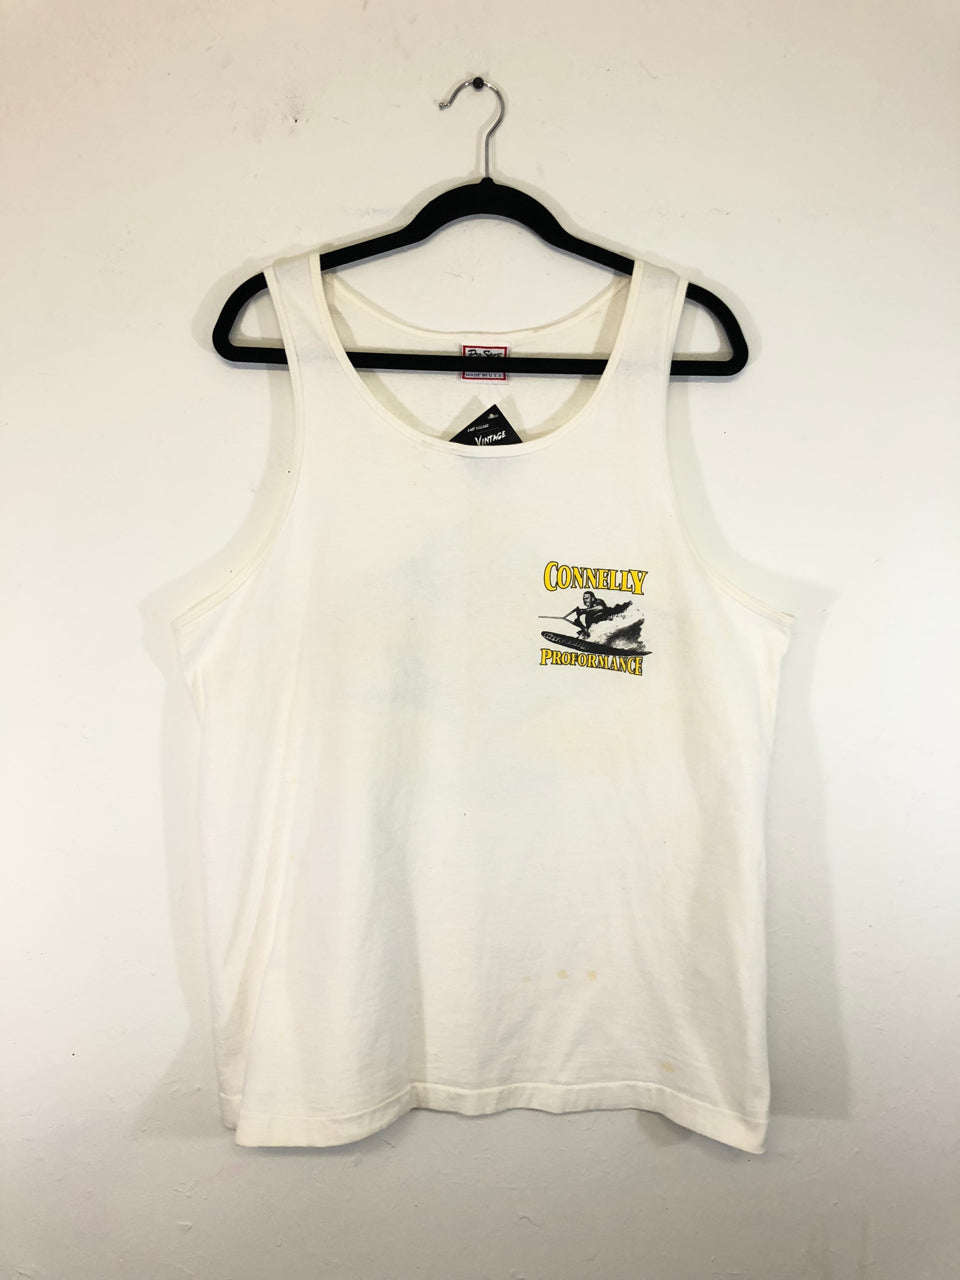 Connelly Proformance Tank Top